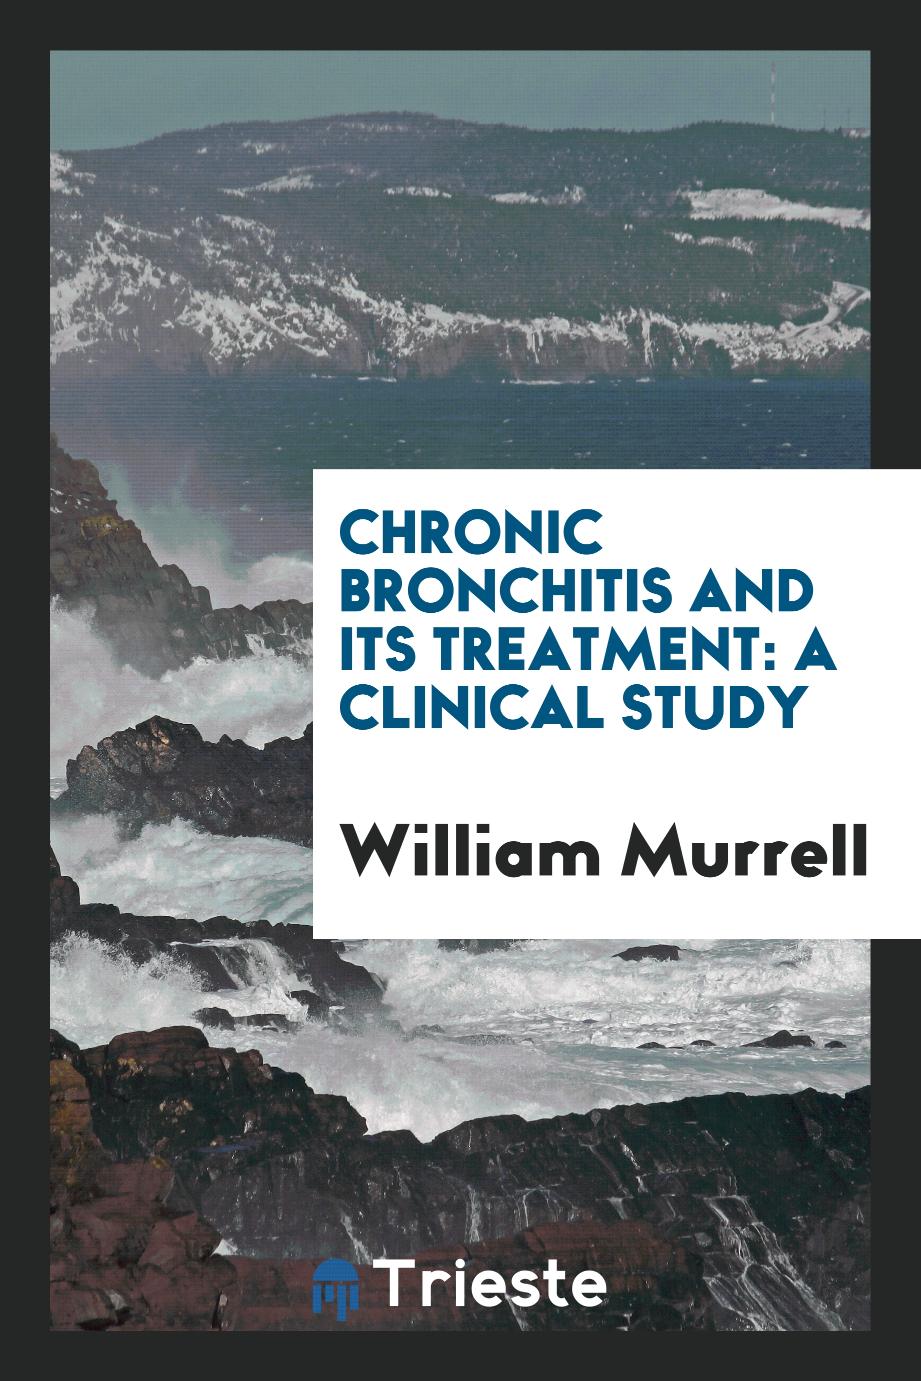 Chronic Bronchitis and Its Treatment: A Clinical Study